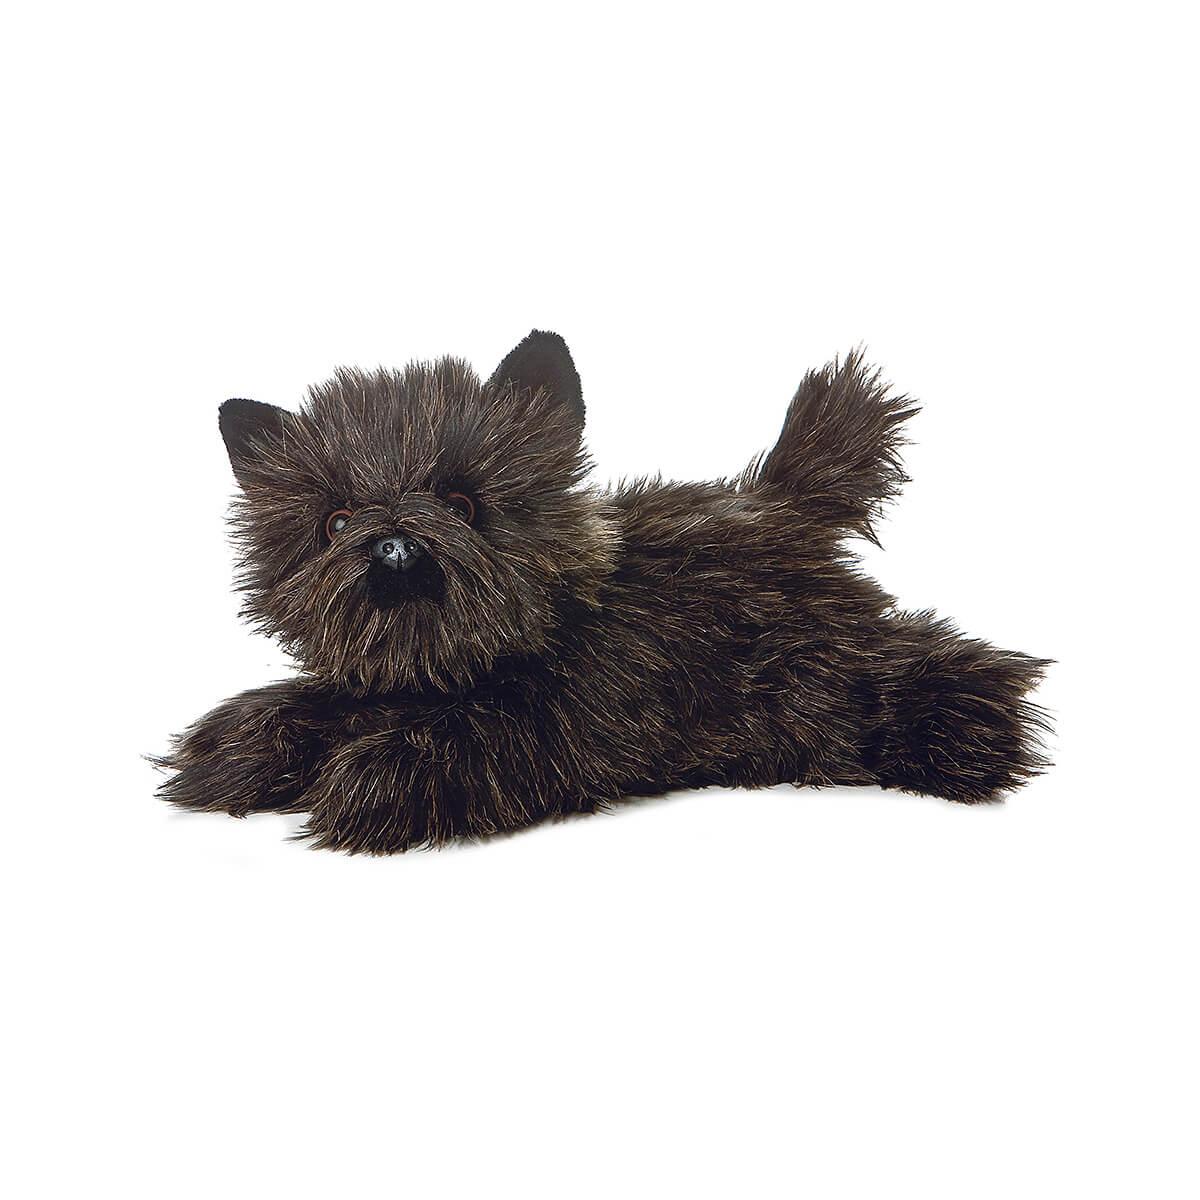  Toto Cairn Terrier Plush Toy